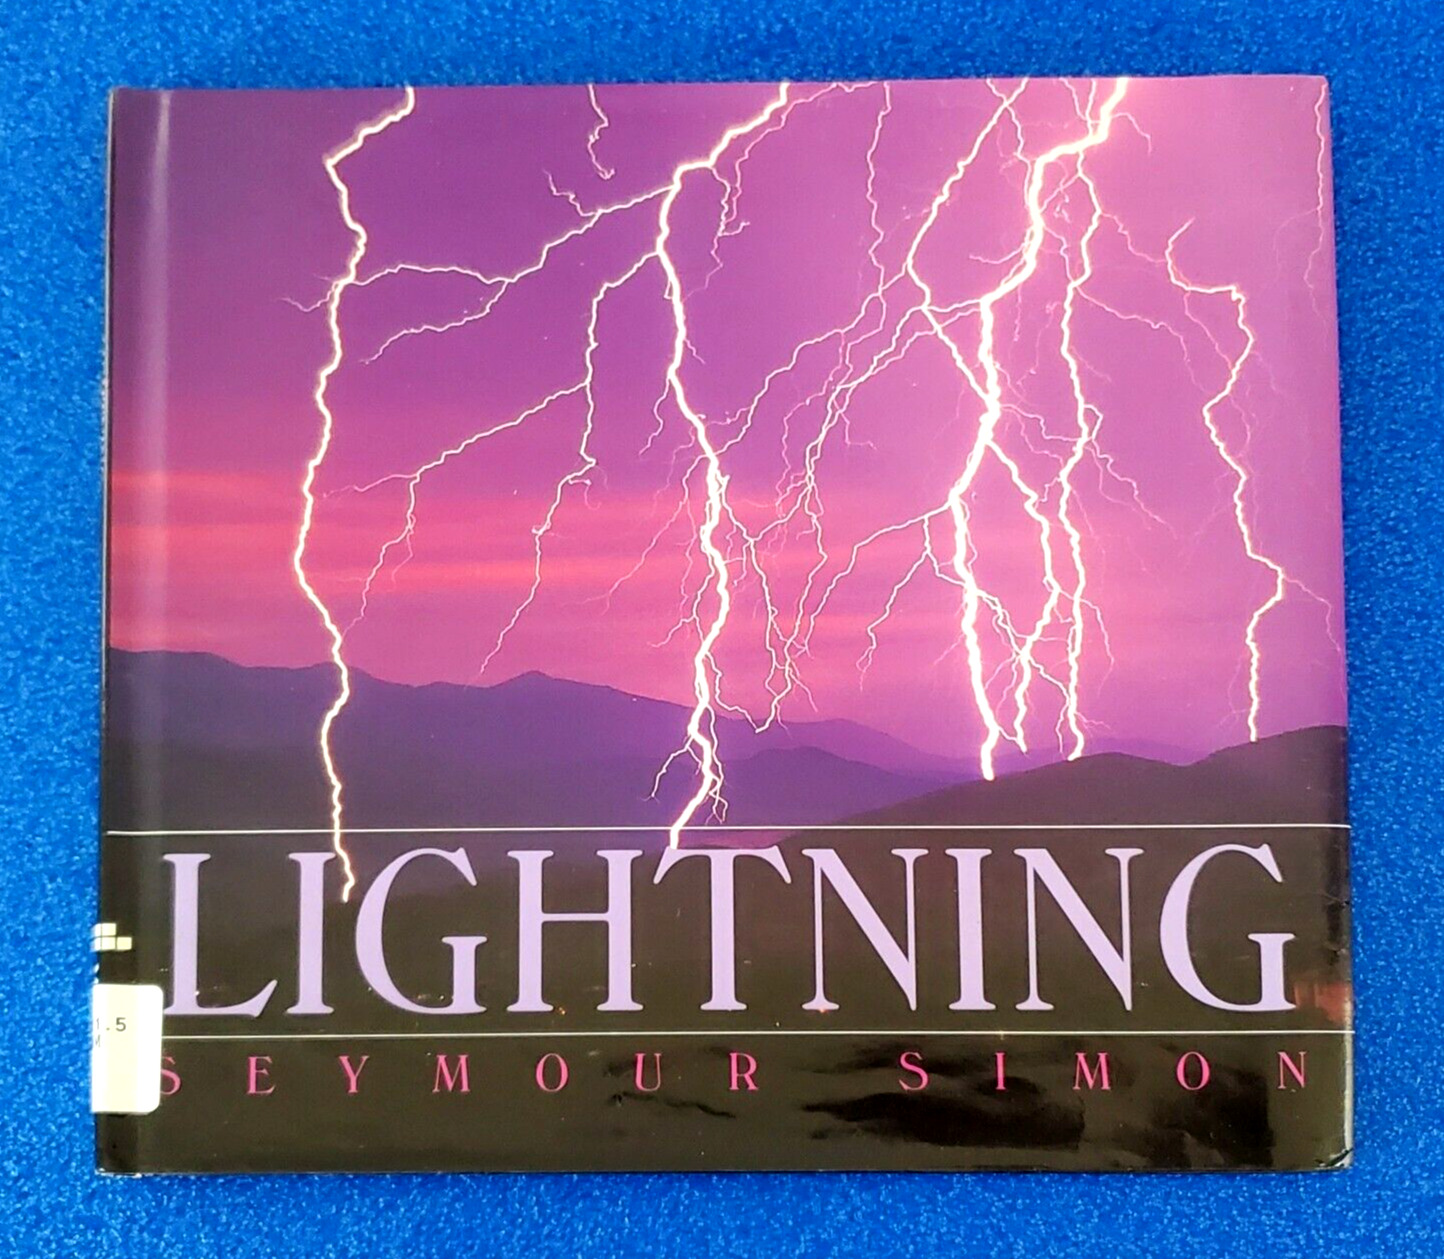 LIGHTNING BY: SEYMOUR SIMON WEATHER AND NATURE HARDCOVER PICTURE BOOK SHIPS FREE